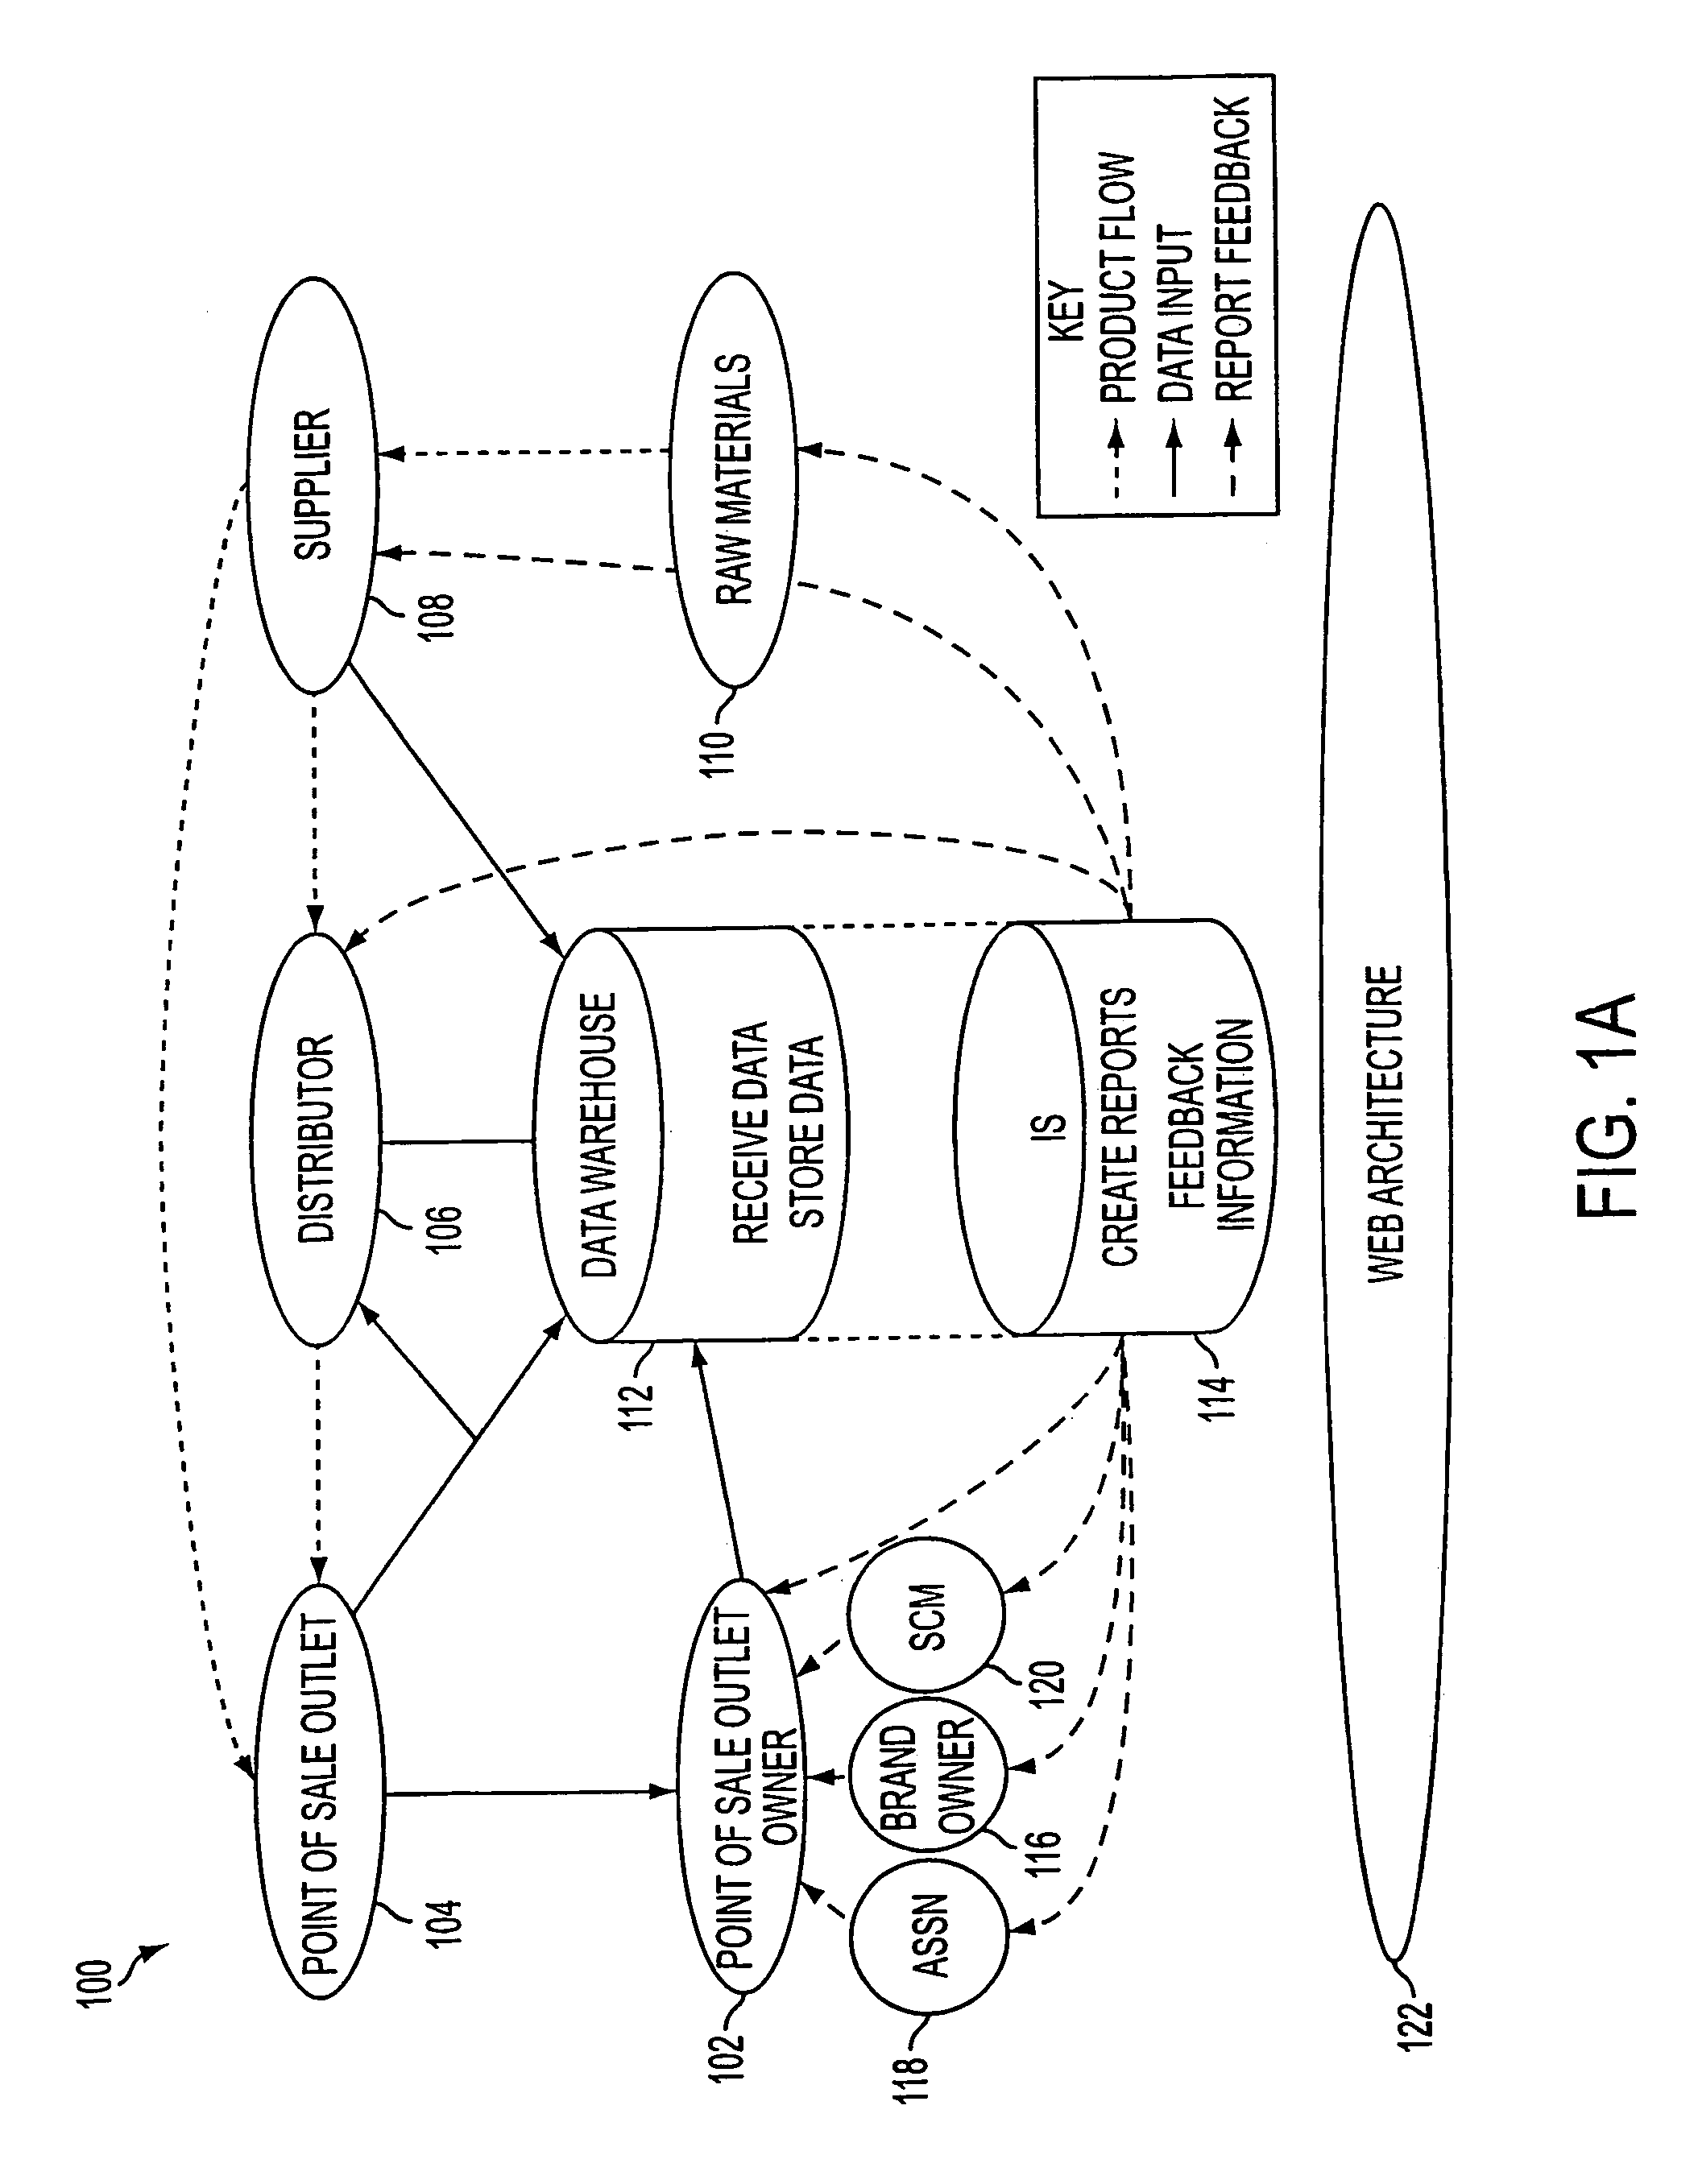 System, method and computer program product for landed cost reporting in a supply chain management framework